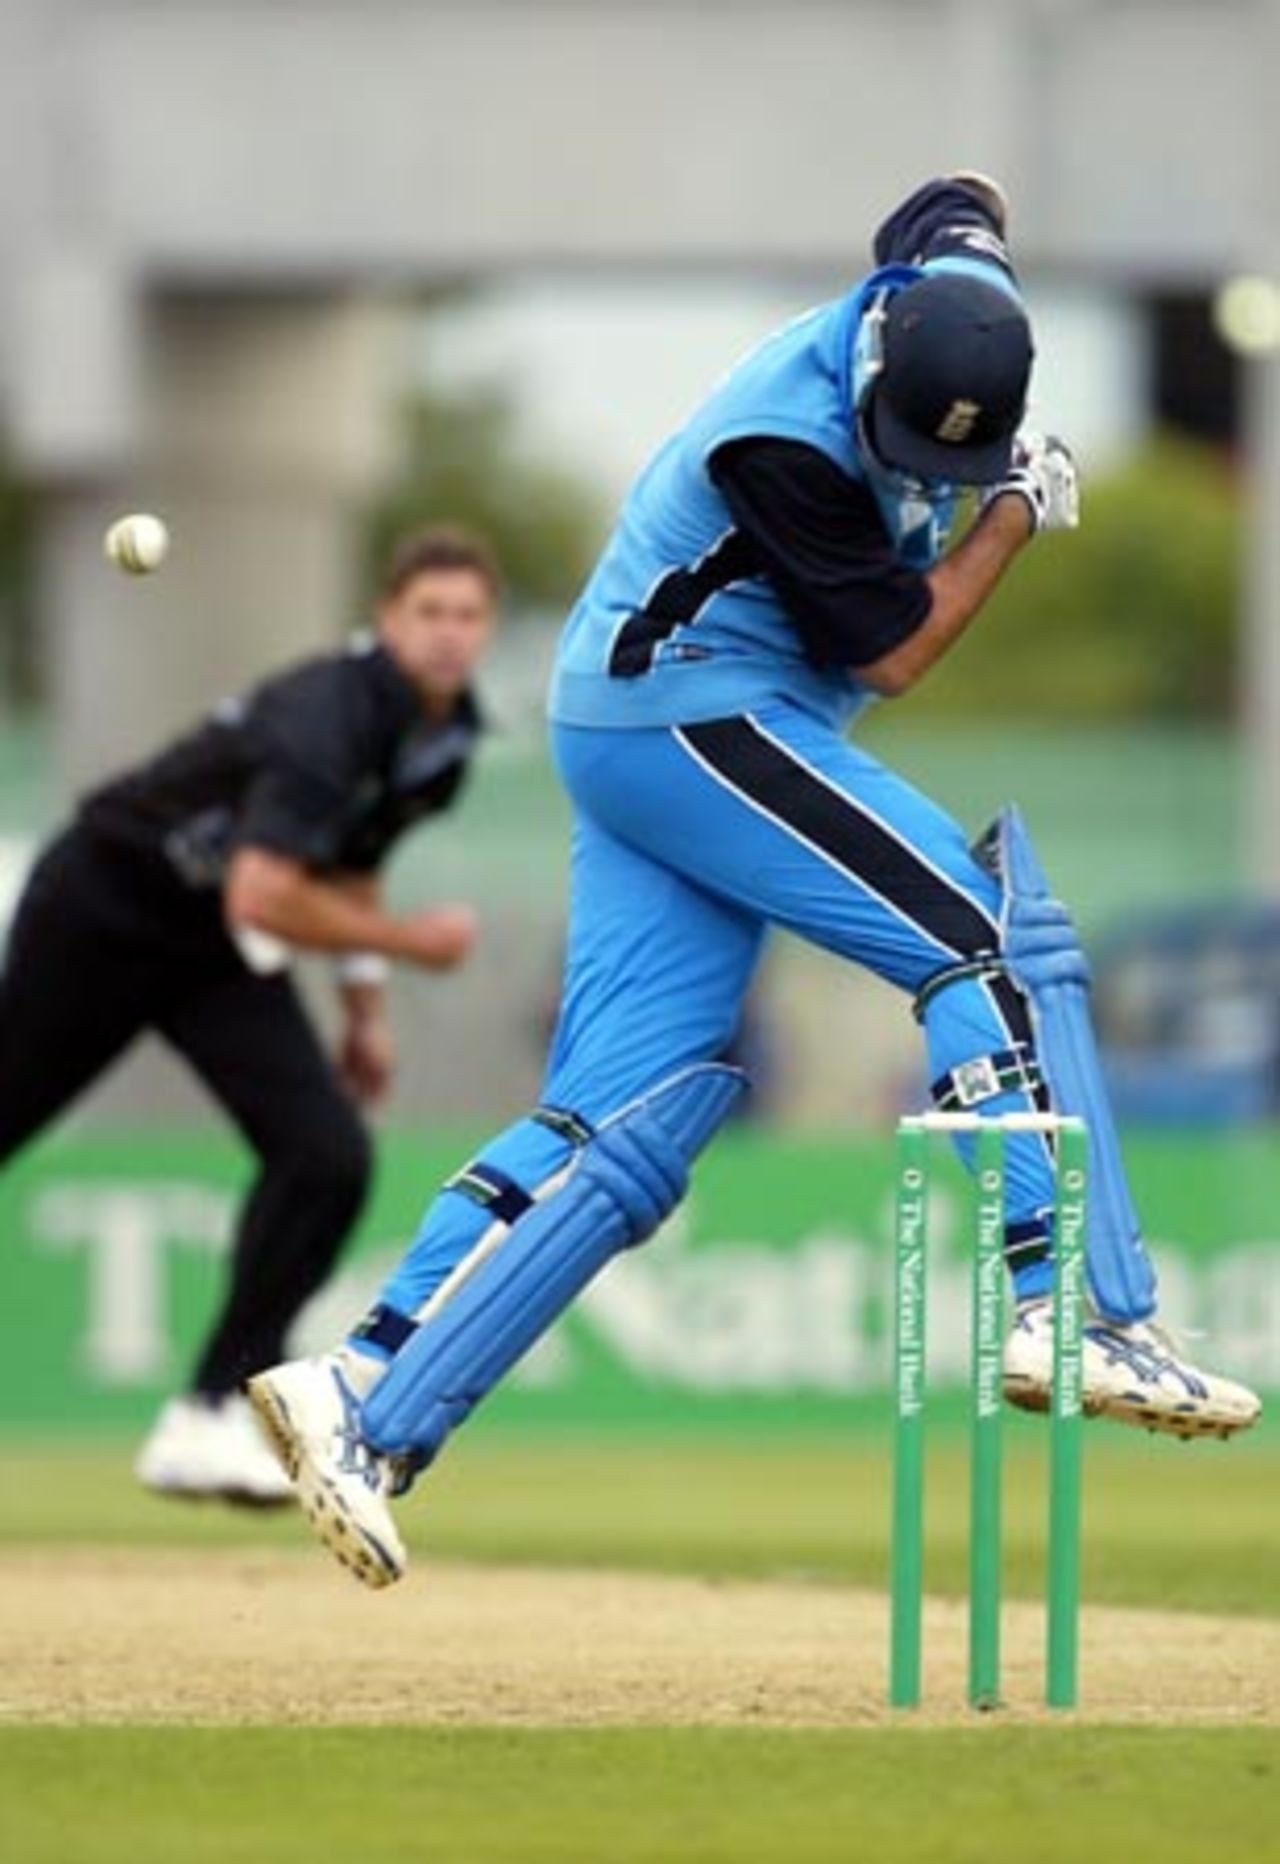 England batsman Andy Caddick is struck by a bouncer from New Zealand bowler Chris Cairns as he jumps to try and avoid it during his innings of two. 1st ODI: New Zealand v England at Jade Stadium, Christchurch, 13 February 2002.